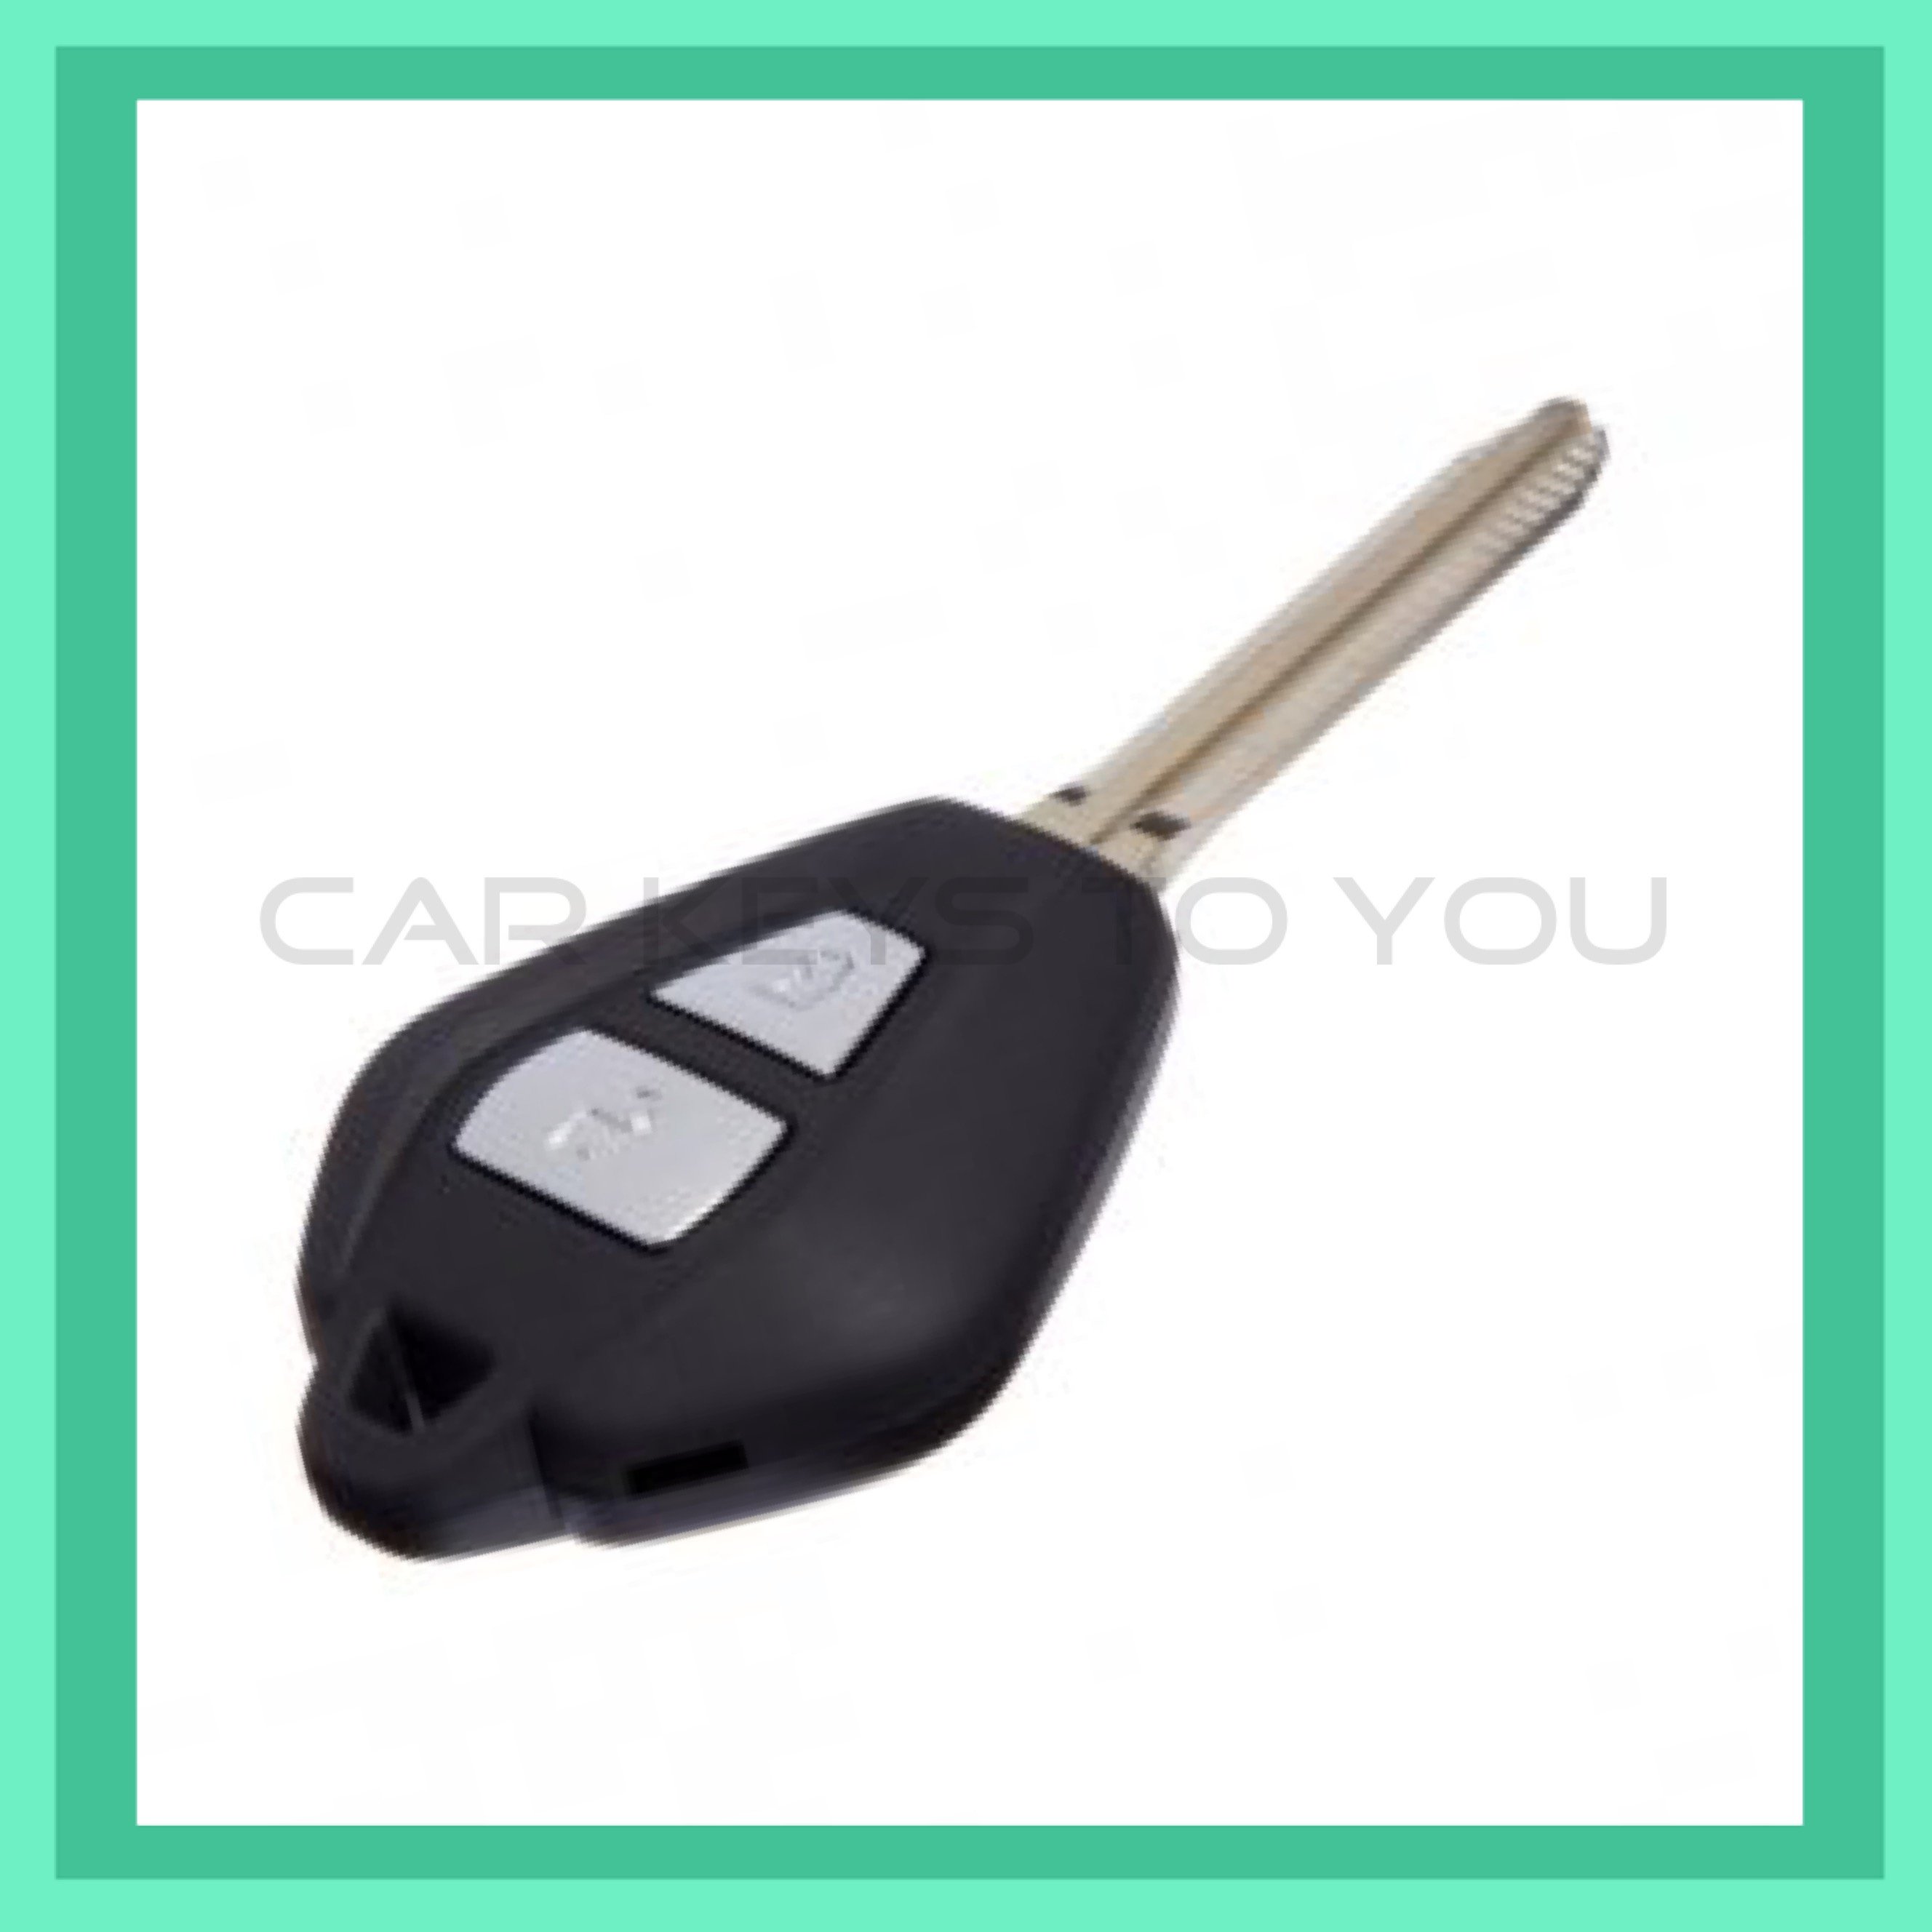 97364906 Genuine Holden New Blank Immobilizer Ignition Key RC Colorado 2009-2011 